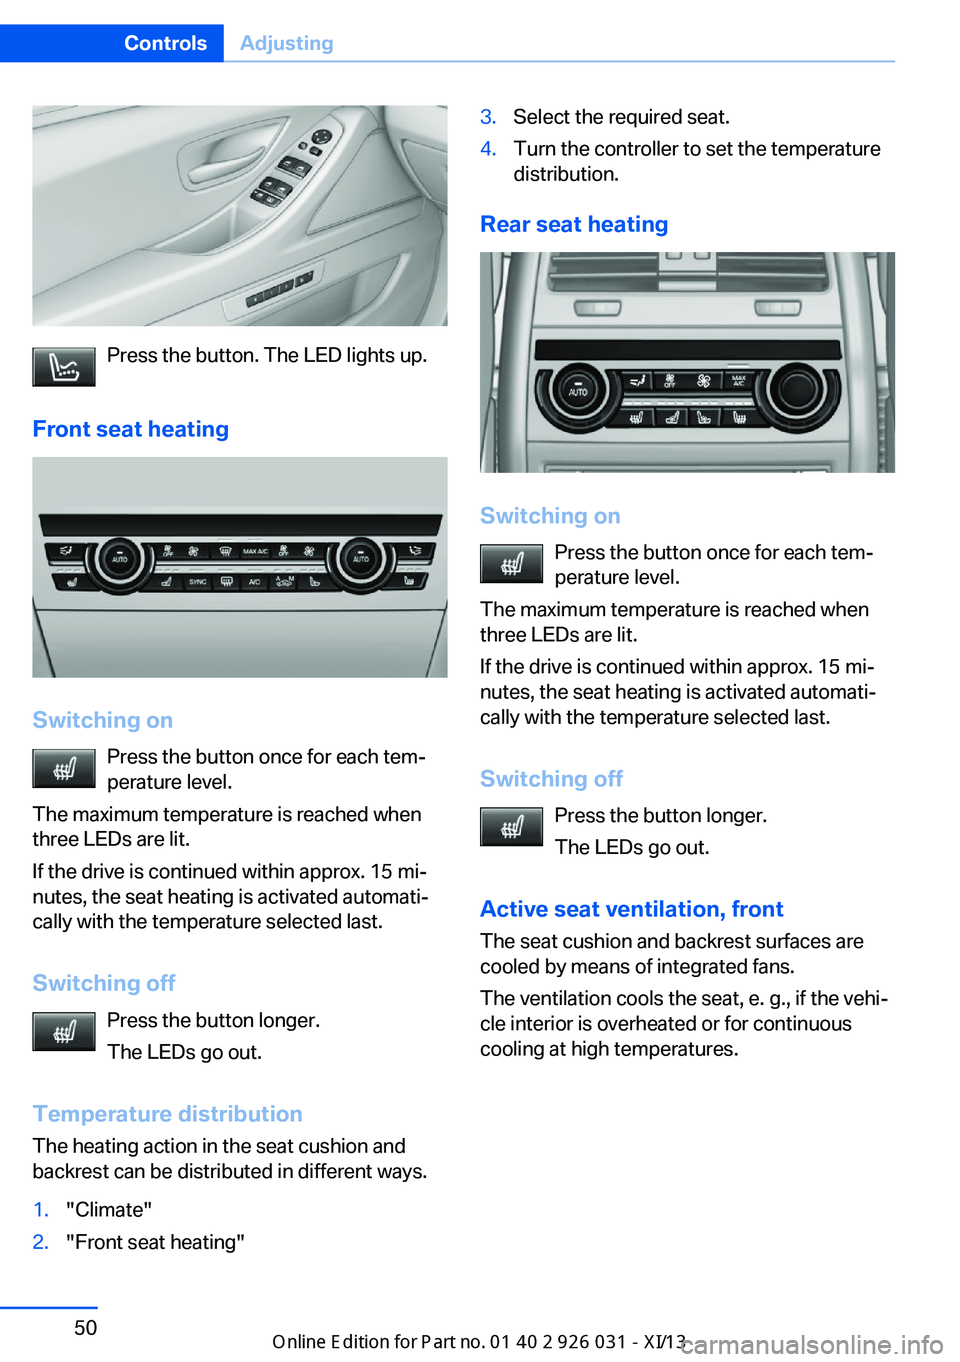 BMW M5 2013 F10 Owners Manual Press the button. The LED lights up.
Front seat heating
Switching on Press the button once for each tem‐
perature level.
The maximum temperature is reached when
three LEDs are lit.
If the drive is c